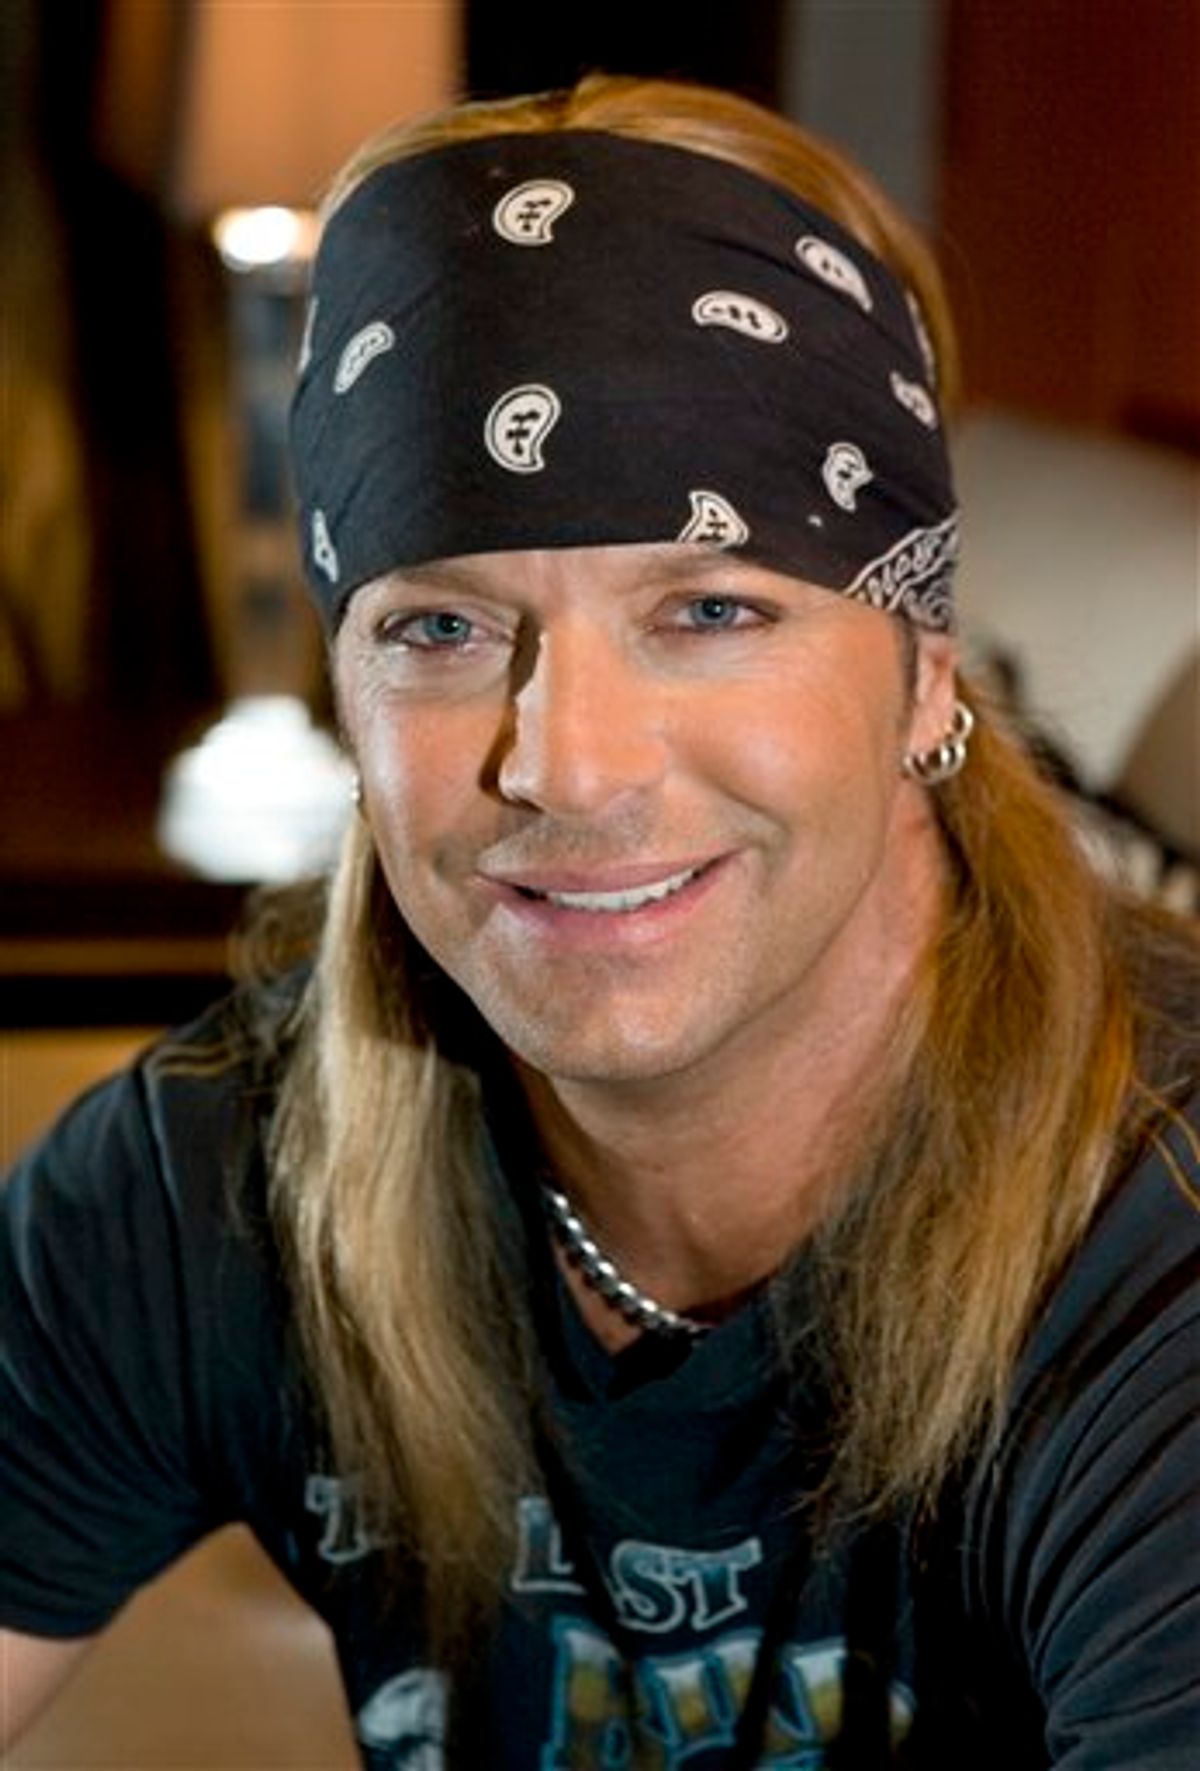 FILE - In this April 9, 2008 file photo, Poison lead singer Bret Michaels poses for a portrait  in the Hollywood area of Los Angeles. (AP Photo/Gus Ruelas, file) (AP)